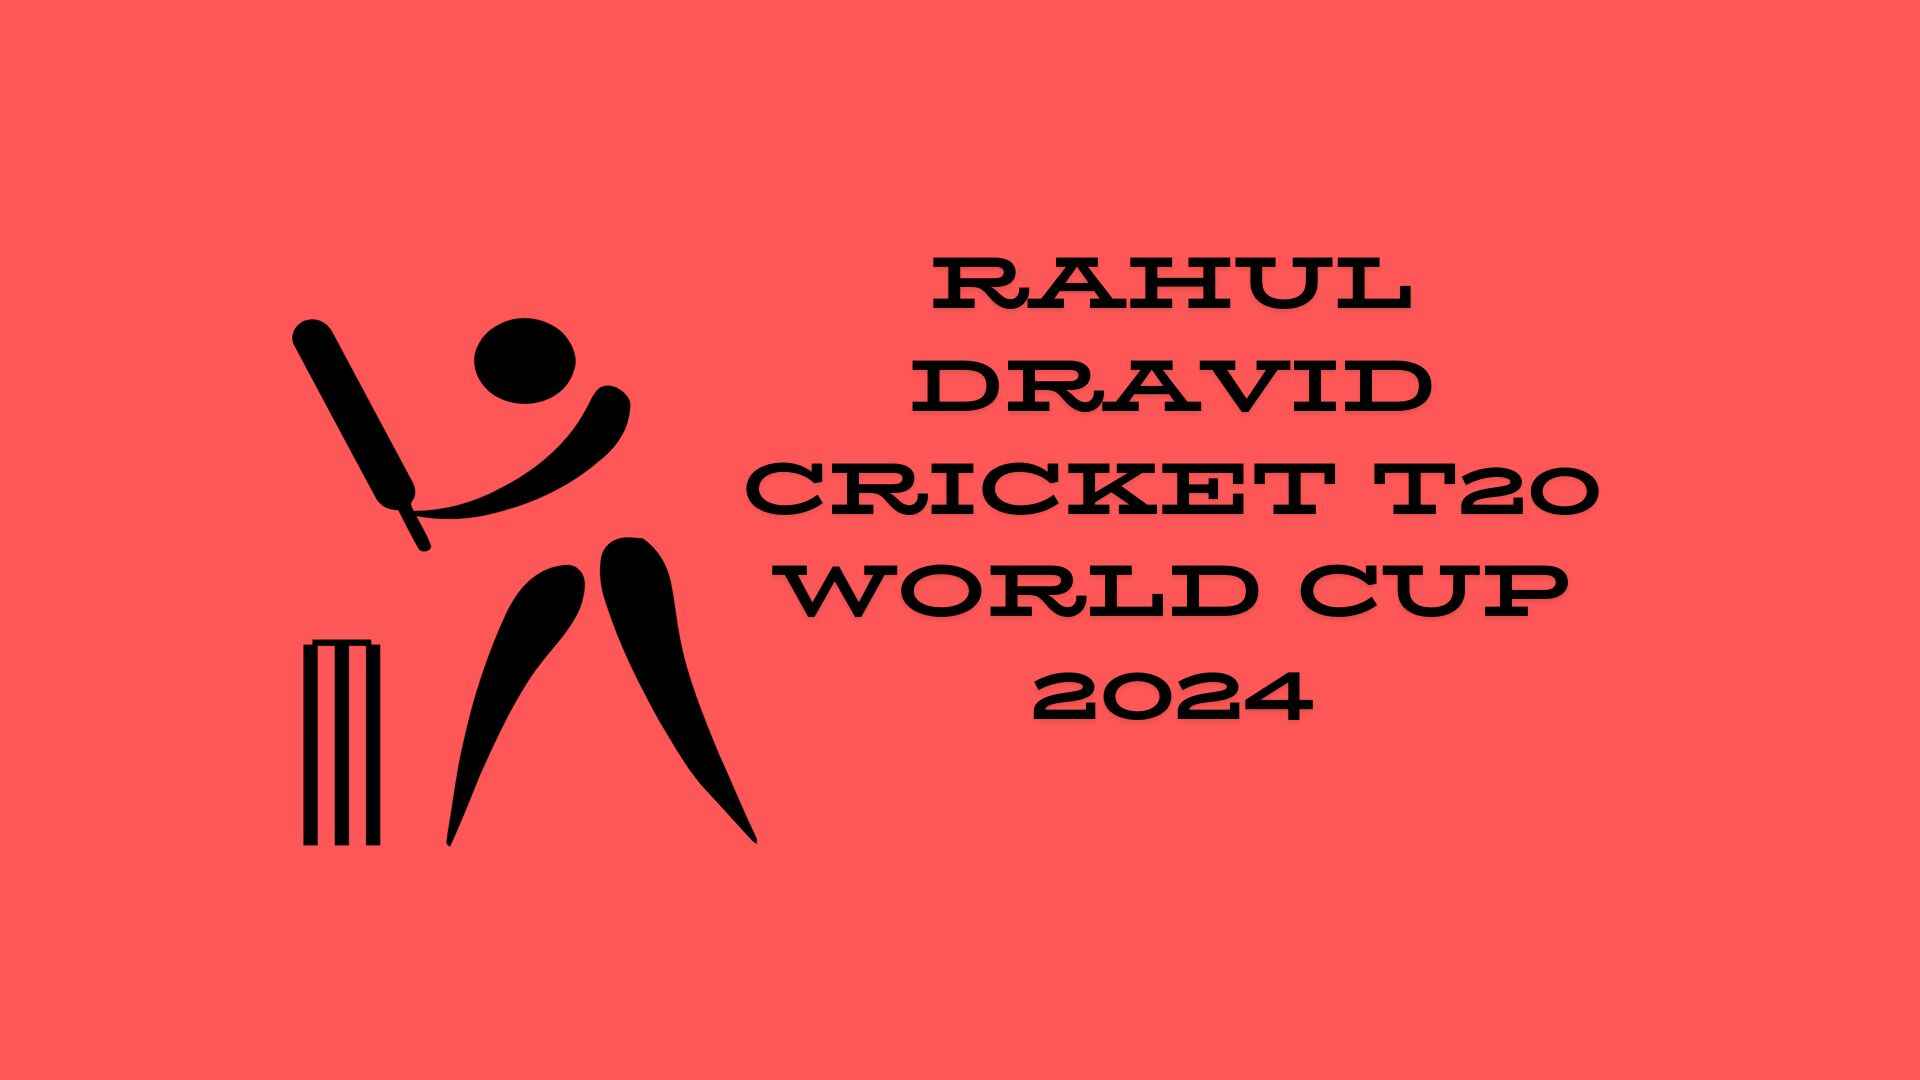 Rahul Dravid Unleashed: The Viral Celebration that Shook the Cricket World